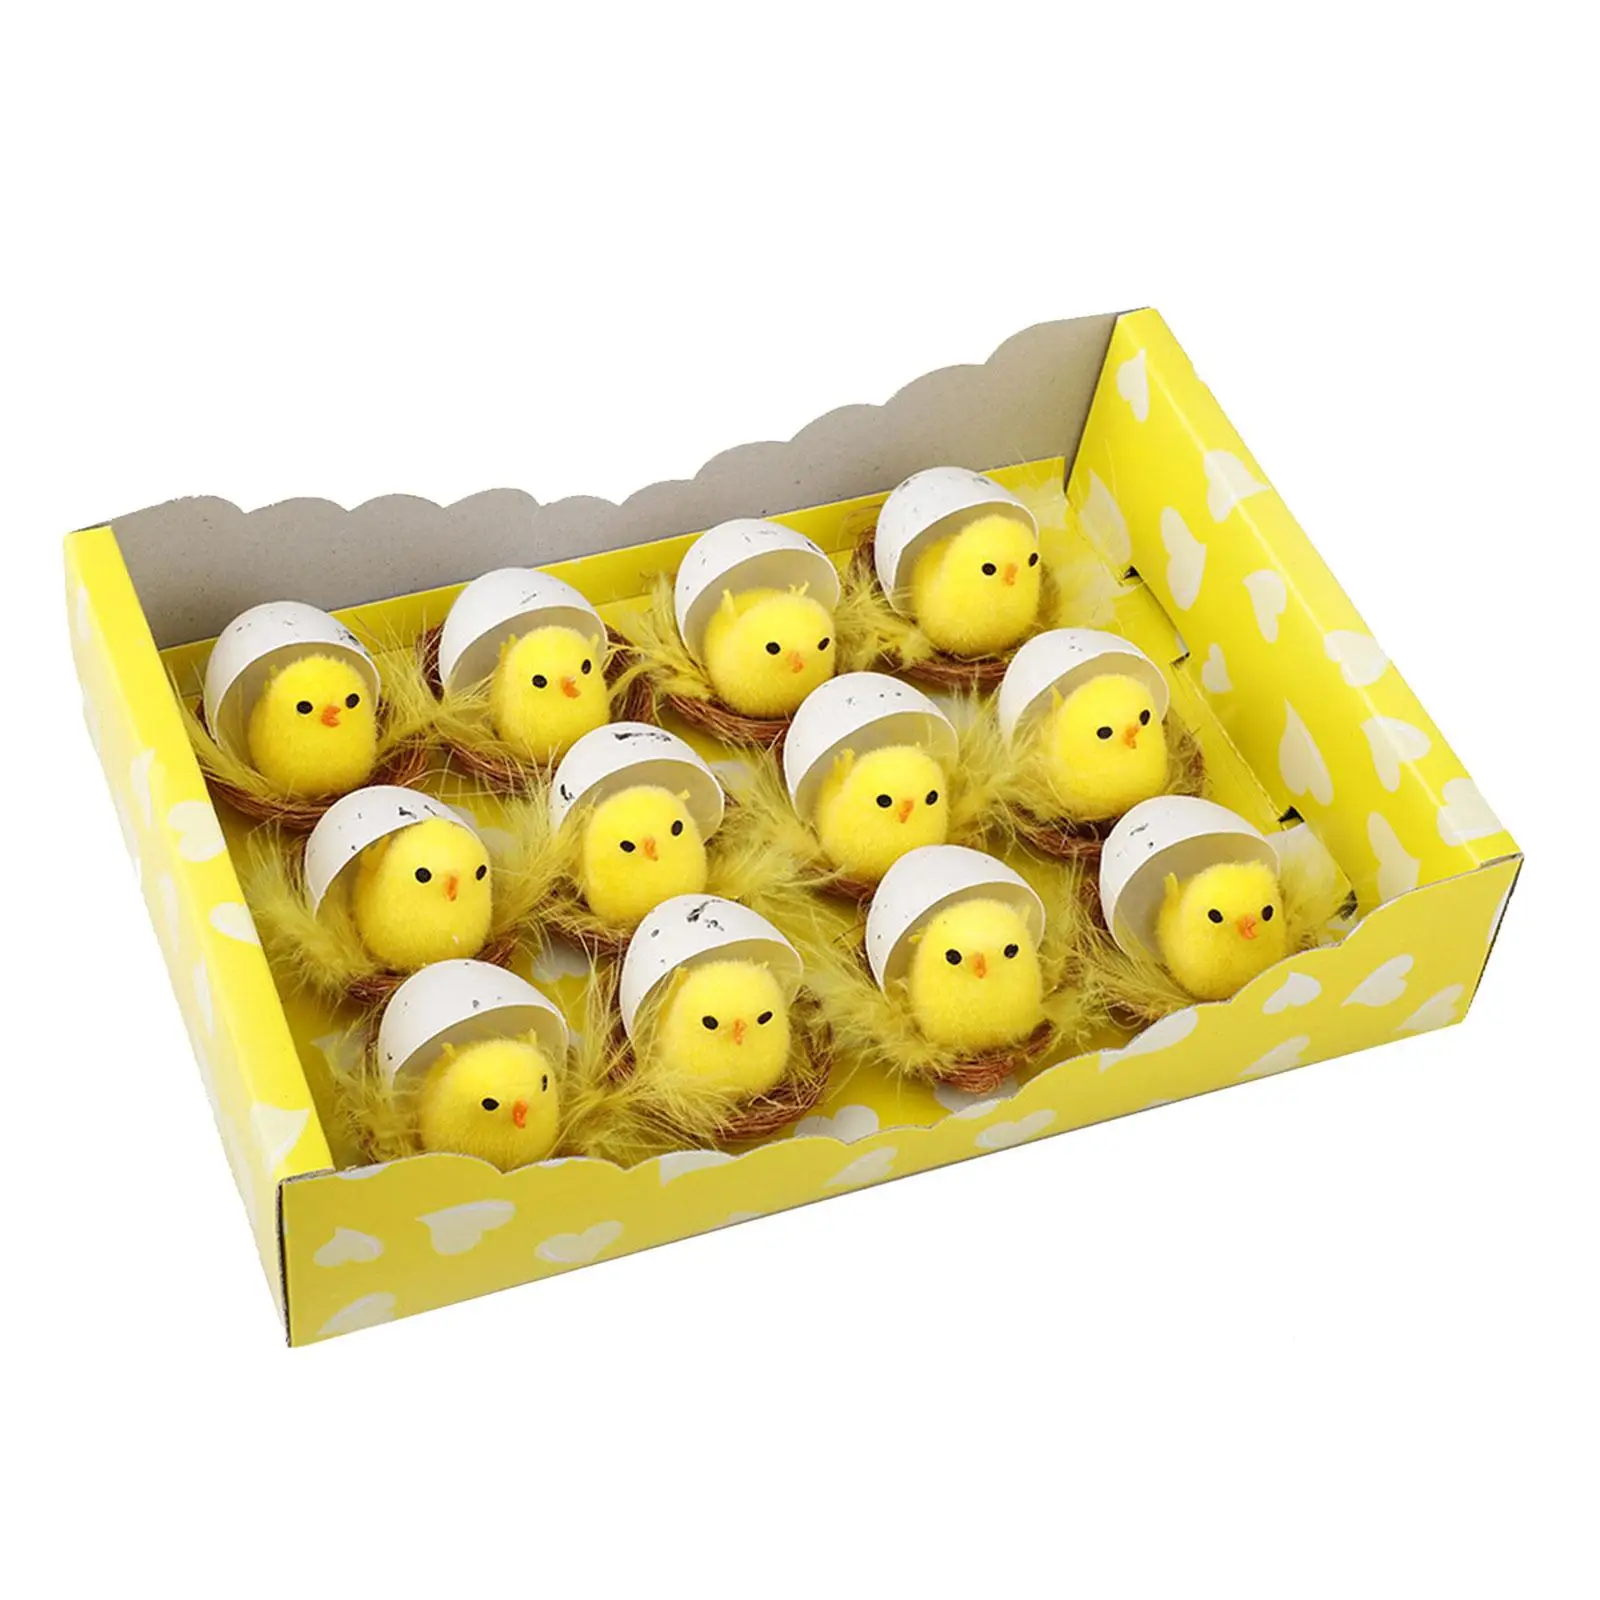 12 Pieces Mini Easter Decorative Chicks Ornaments Cute Basket Fillers Easter egg Decoration for Wedding Wall Windows Holiday